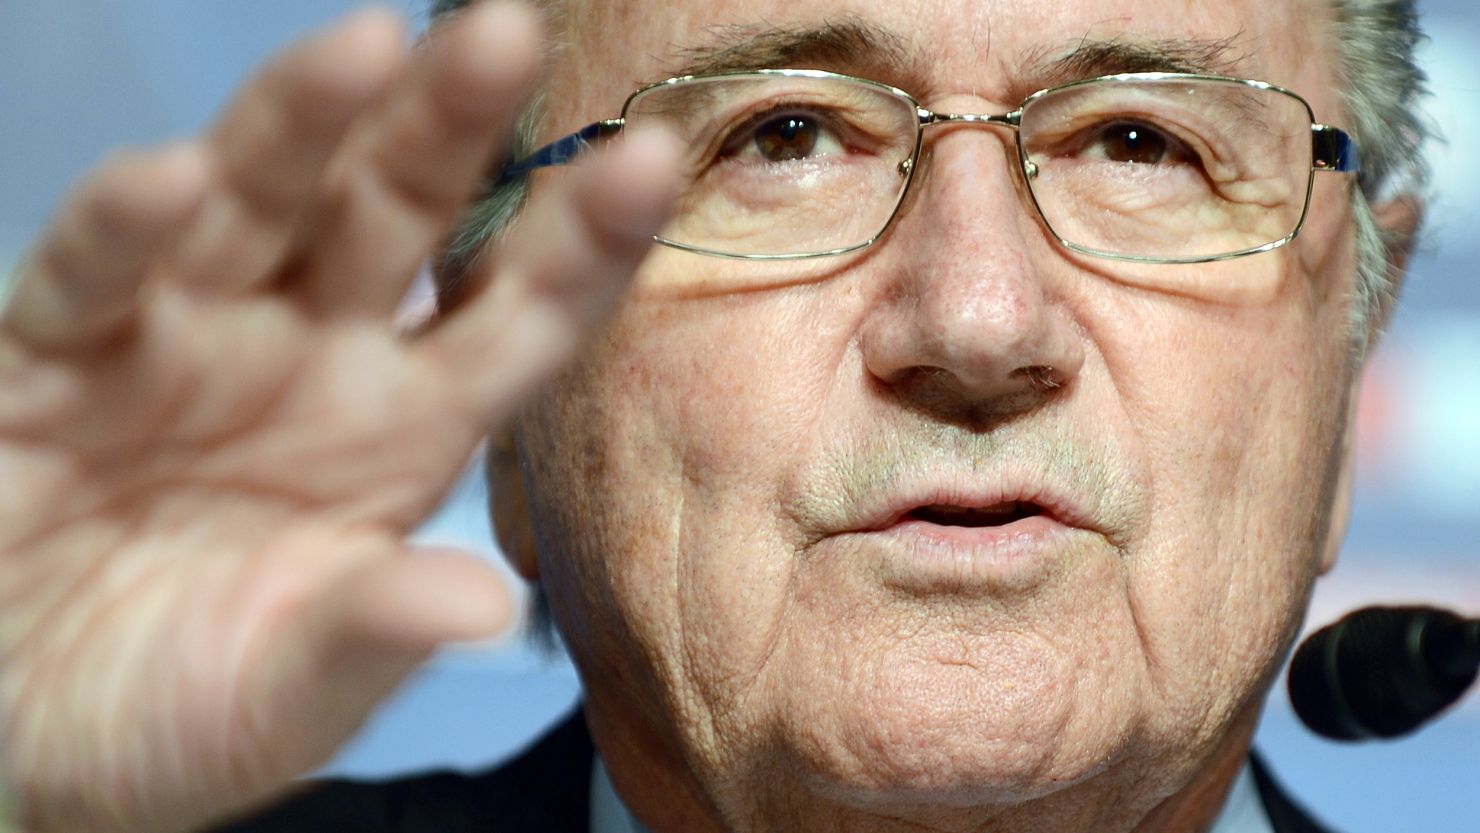 FIFA president Sepp Blatter has vowed to crackdown on racism in football.